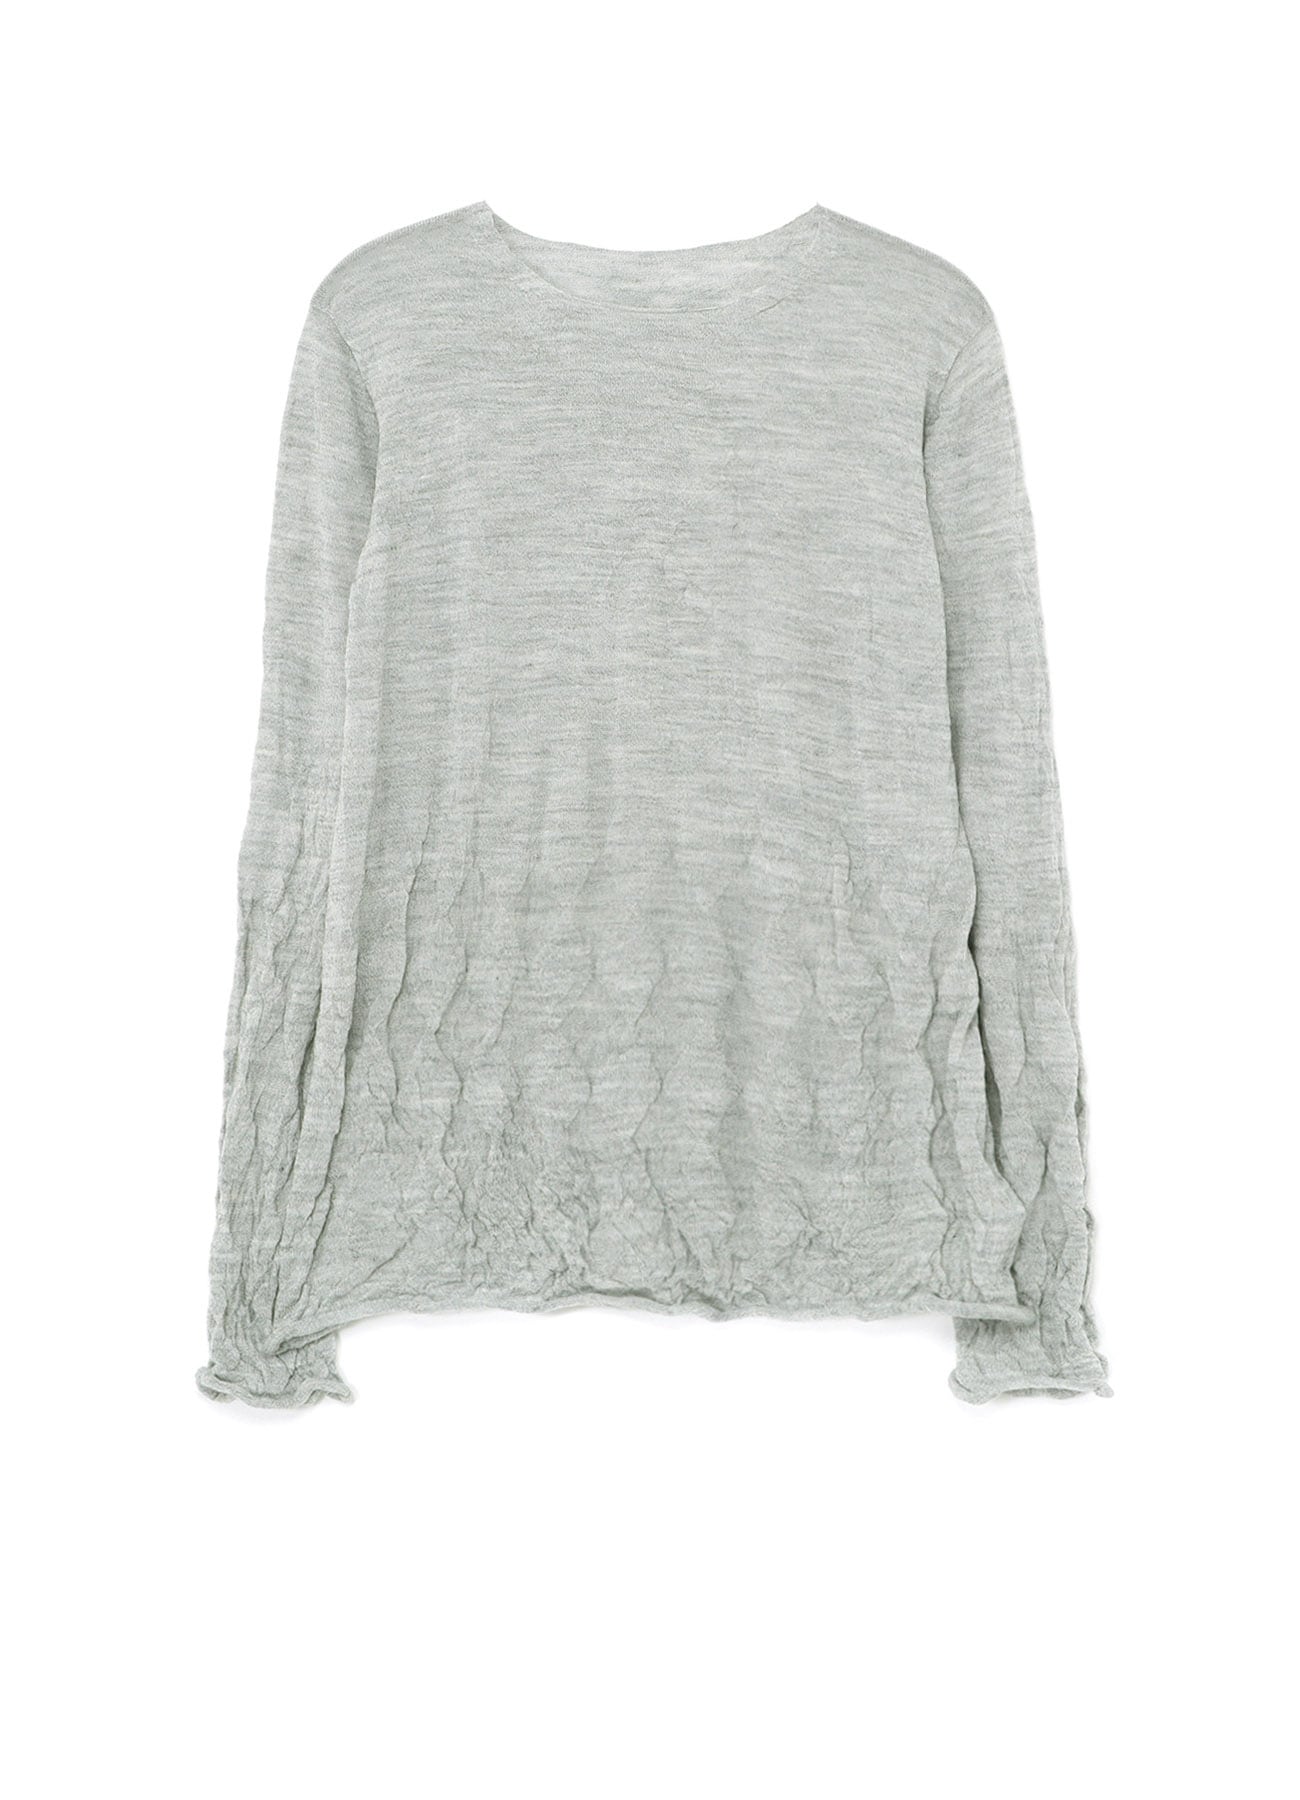 WOOL WRINKLE ROUND NECK LONG SLEEVE T-SHIRT(S Grey): Y's｜THE SHOP 